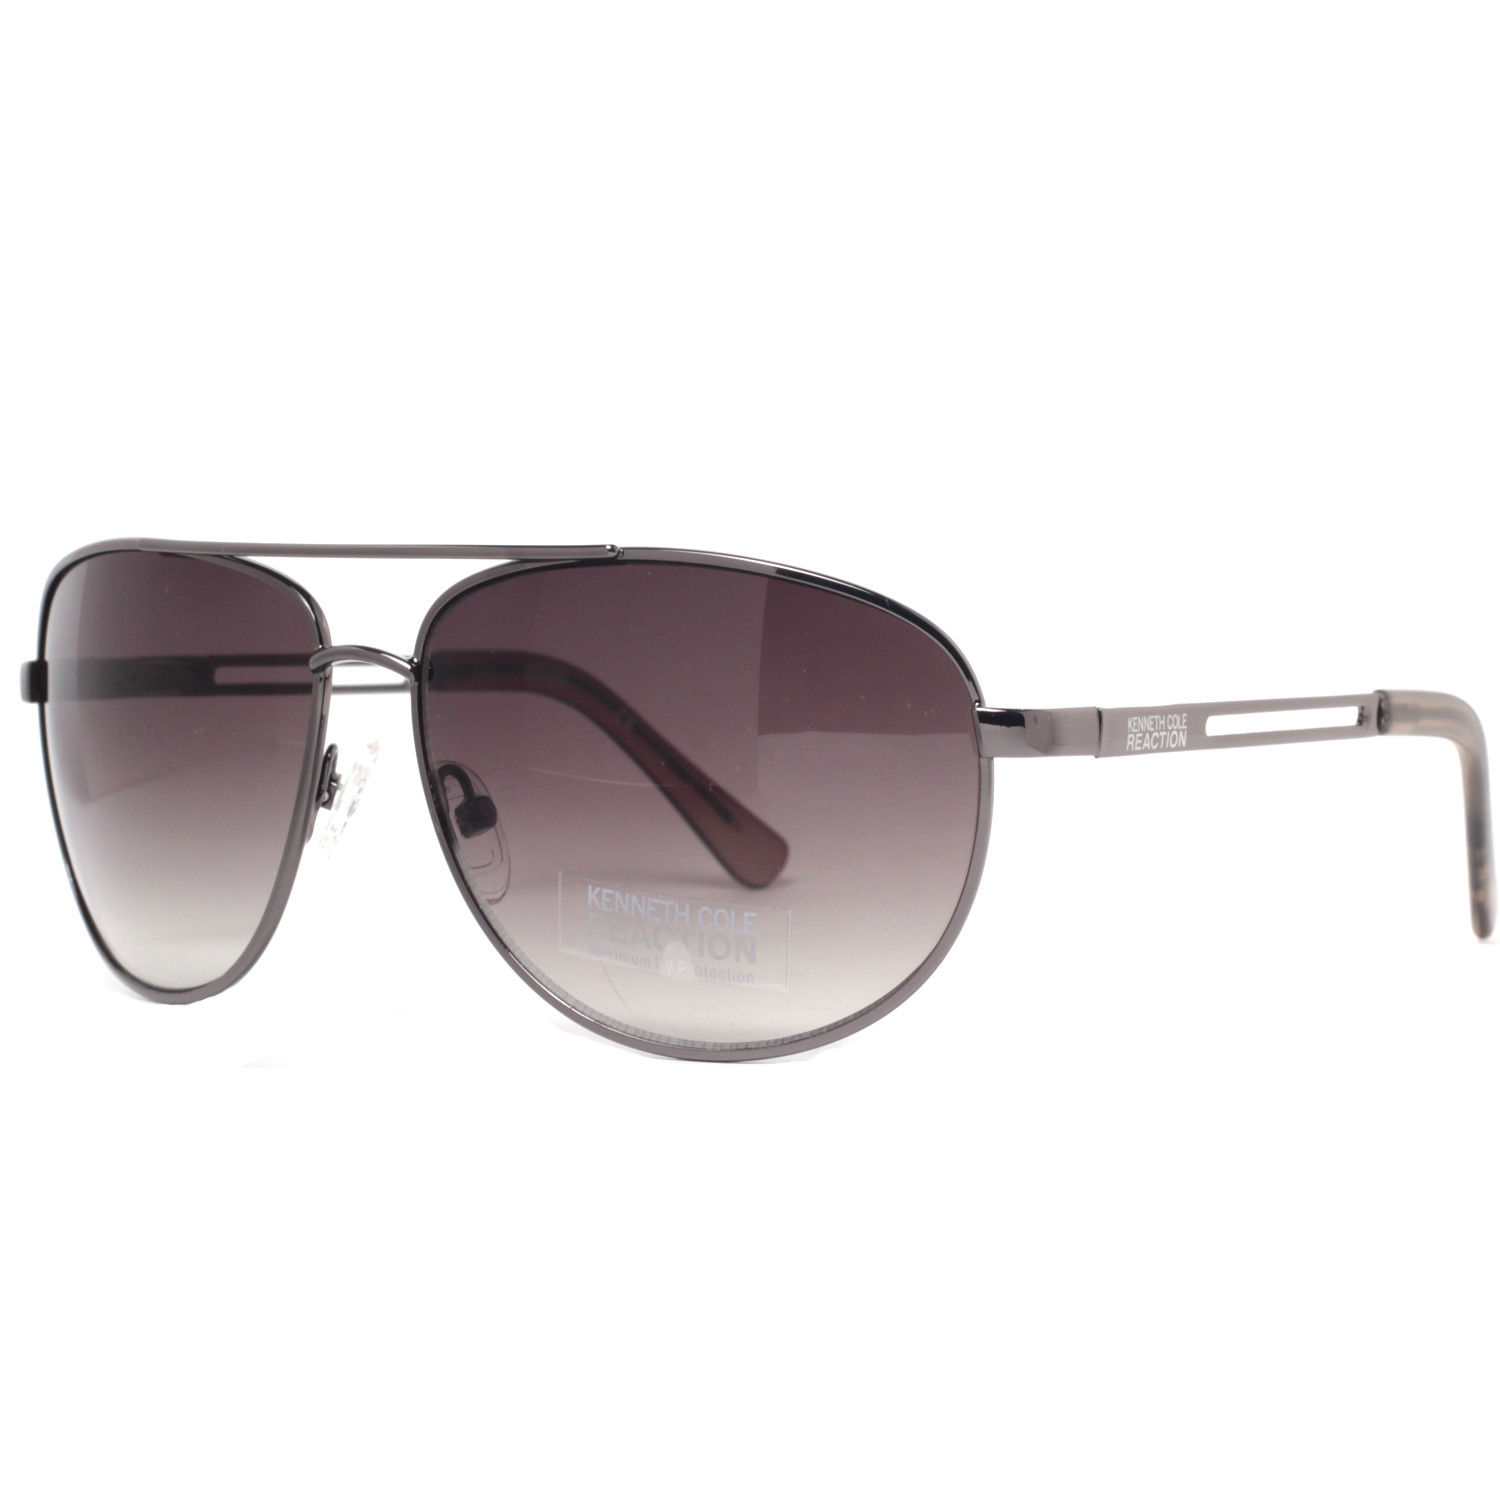 Kenneth Cole Reaction men’s sunglasses for $20, free shipping